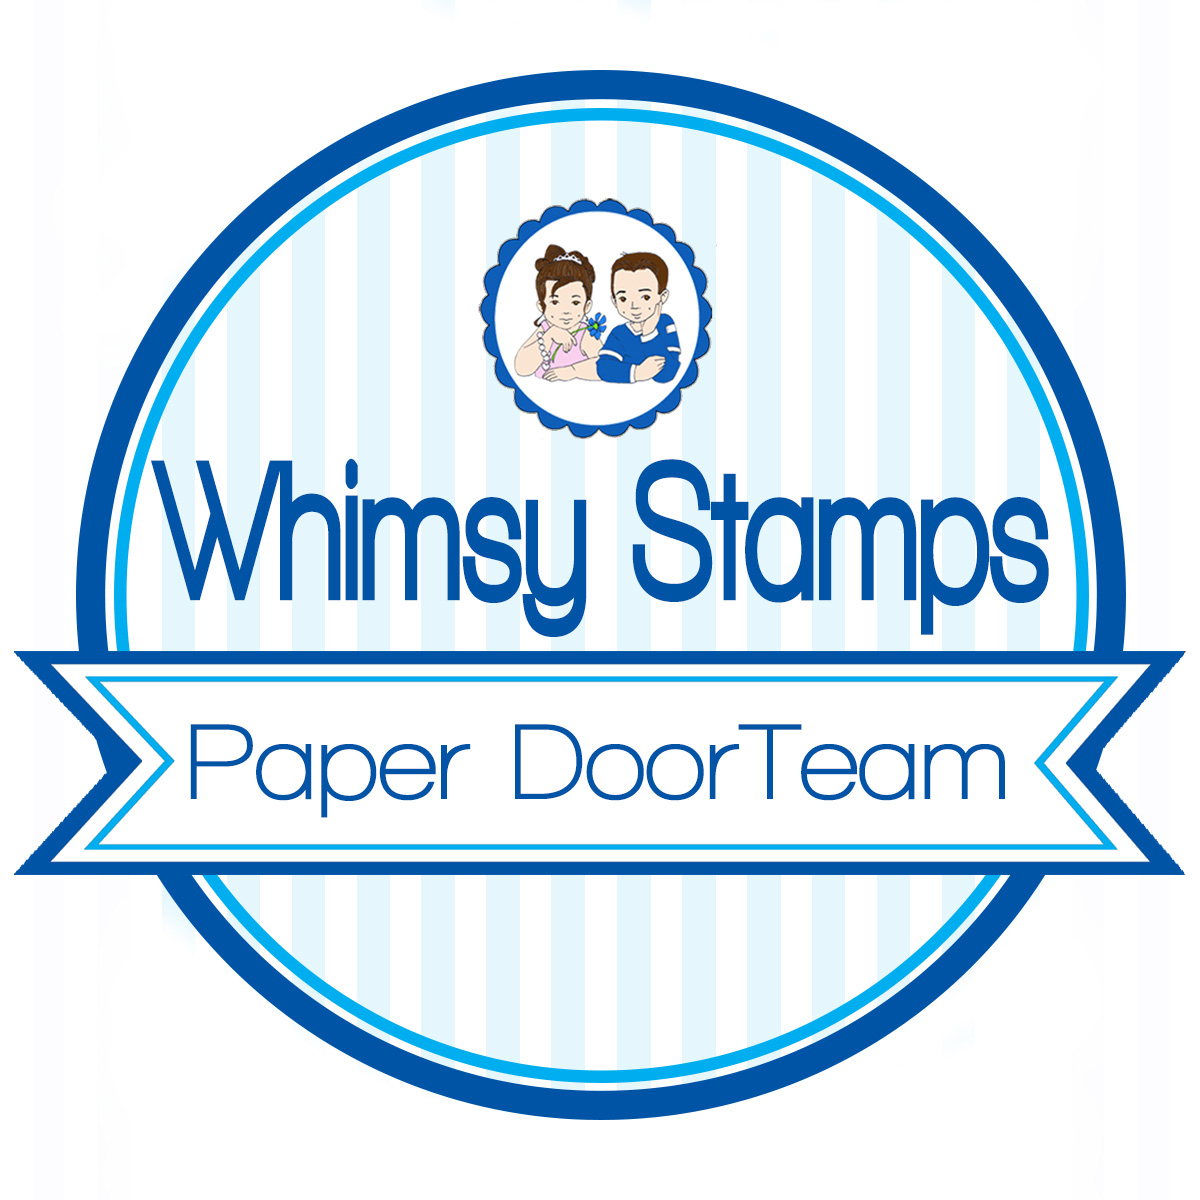 ~ Designing for Whimsy Stamps Paper Door ~